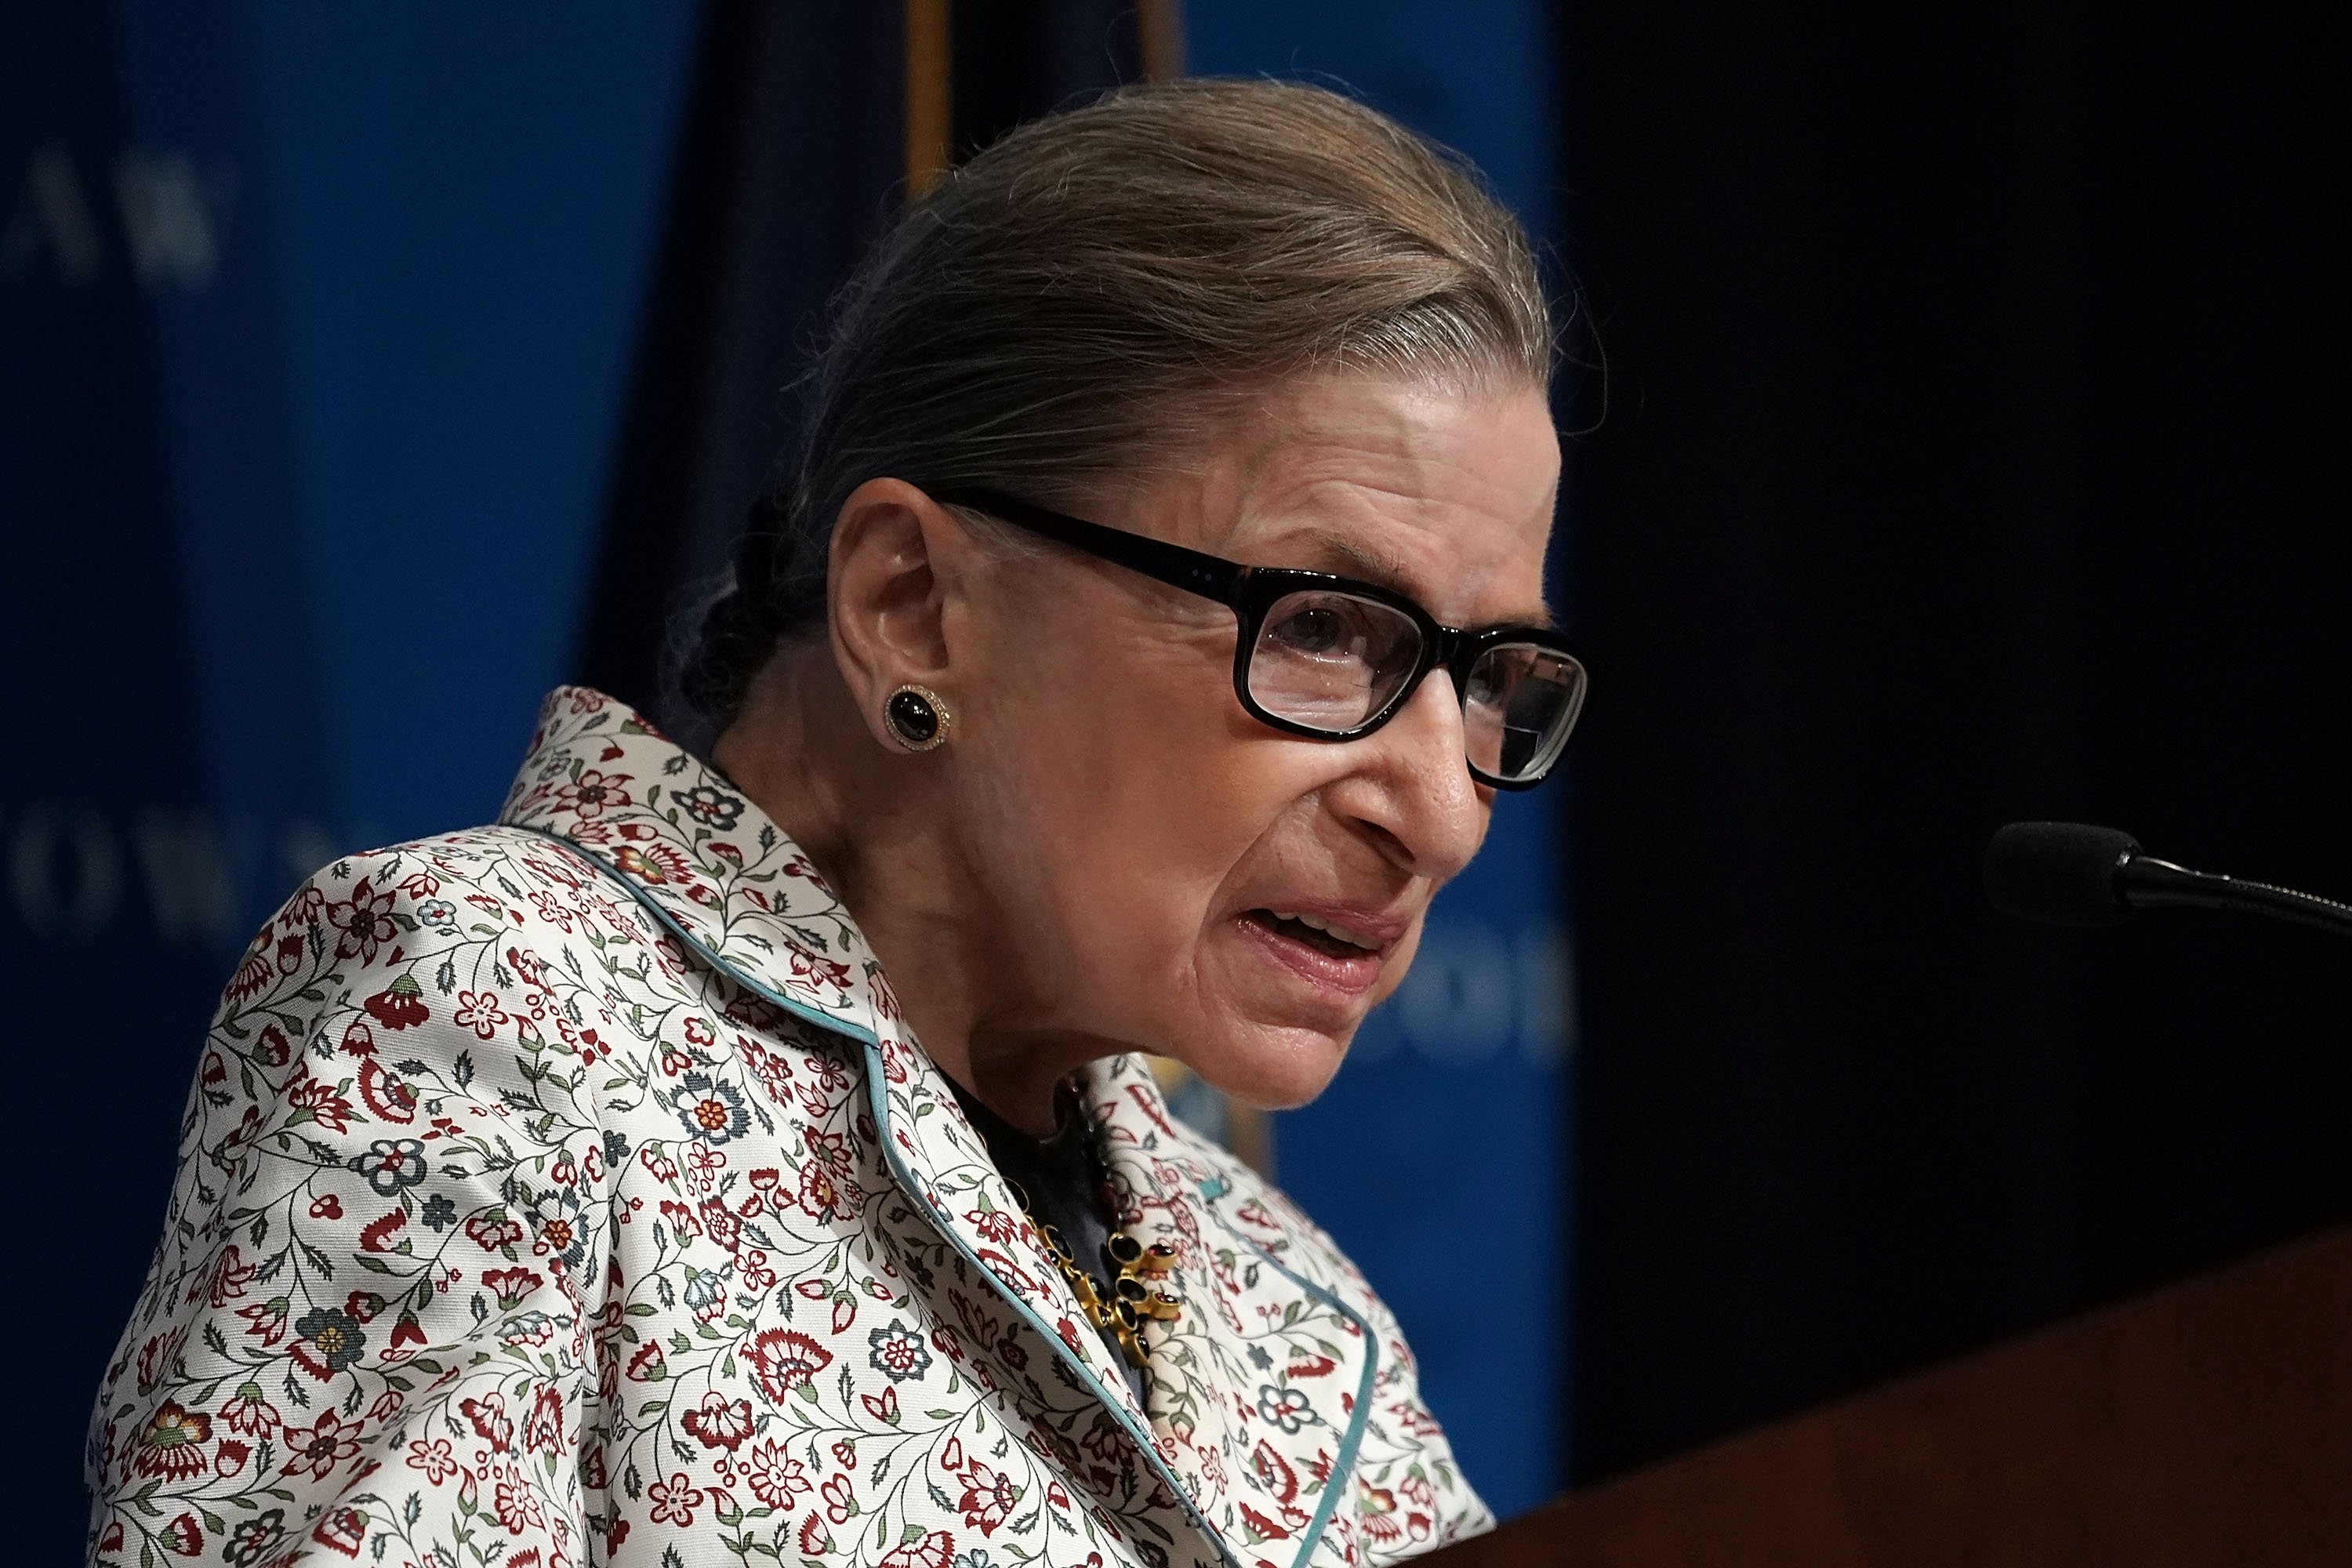  Supreme Court Justice Ruth Bader Ginsburg participates in a lecture on September 26, 2018, in Washington, DC. | Source: Getty Images.